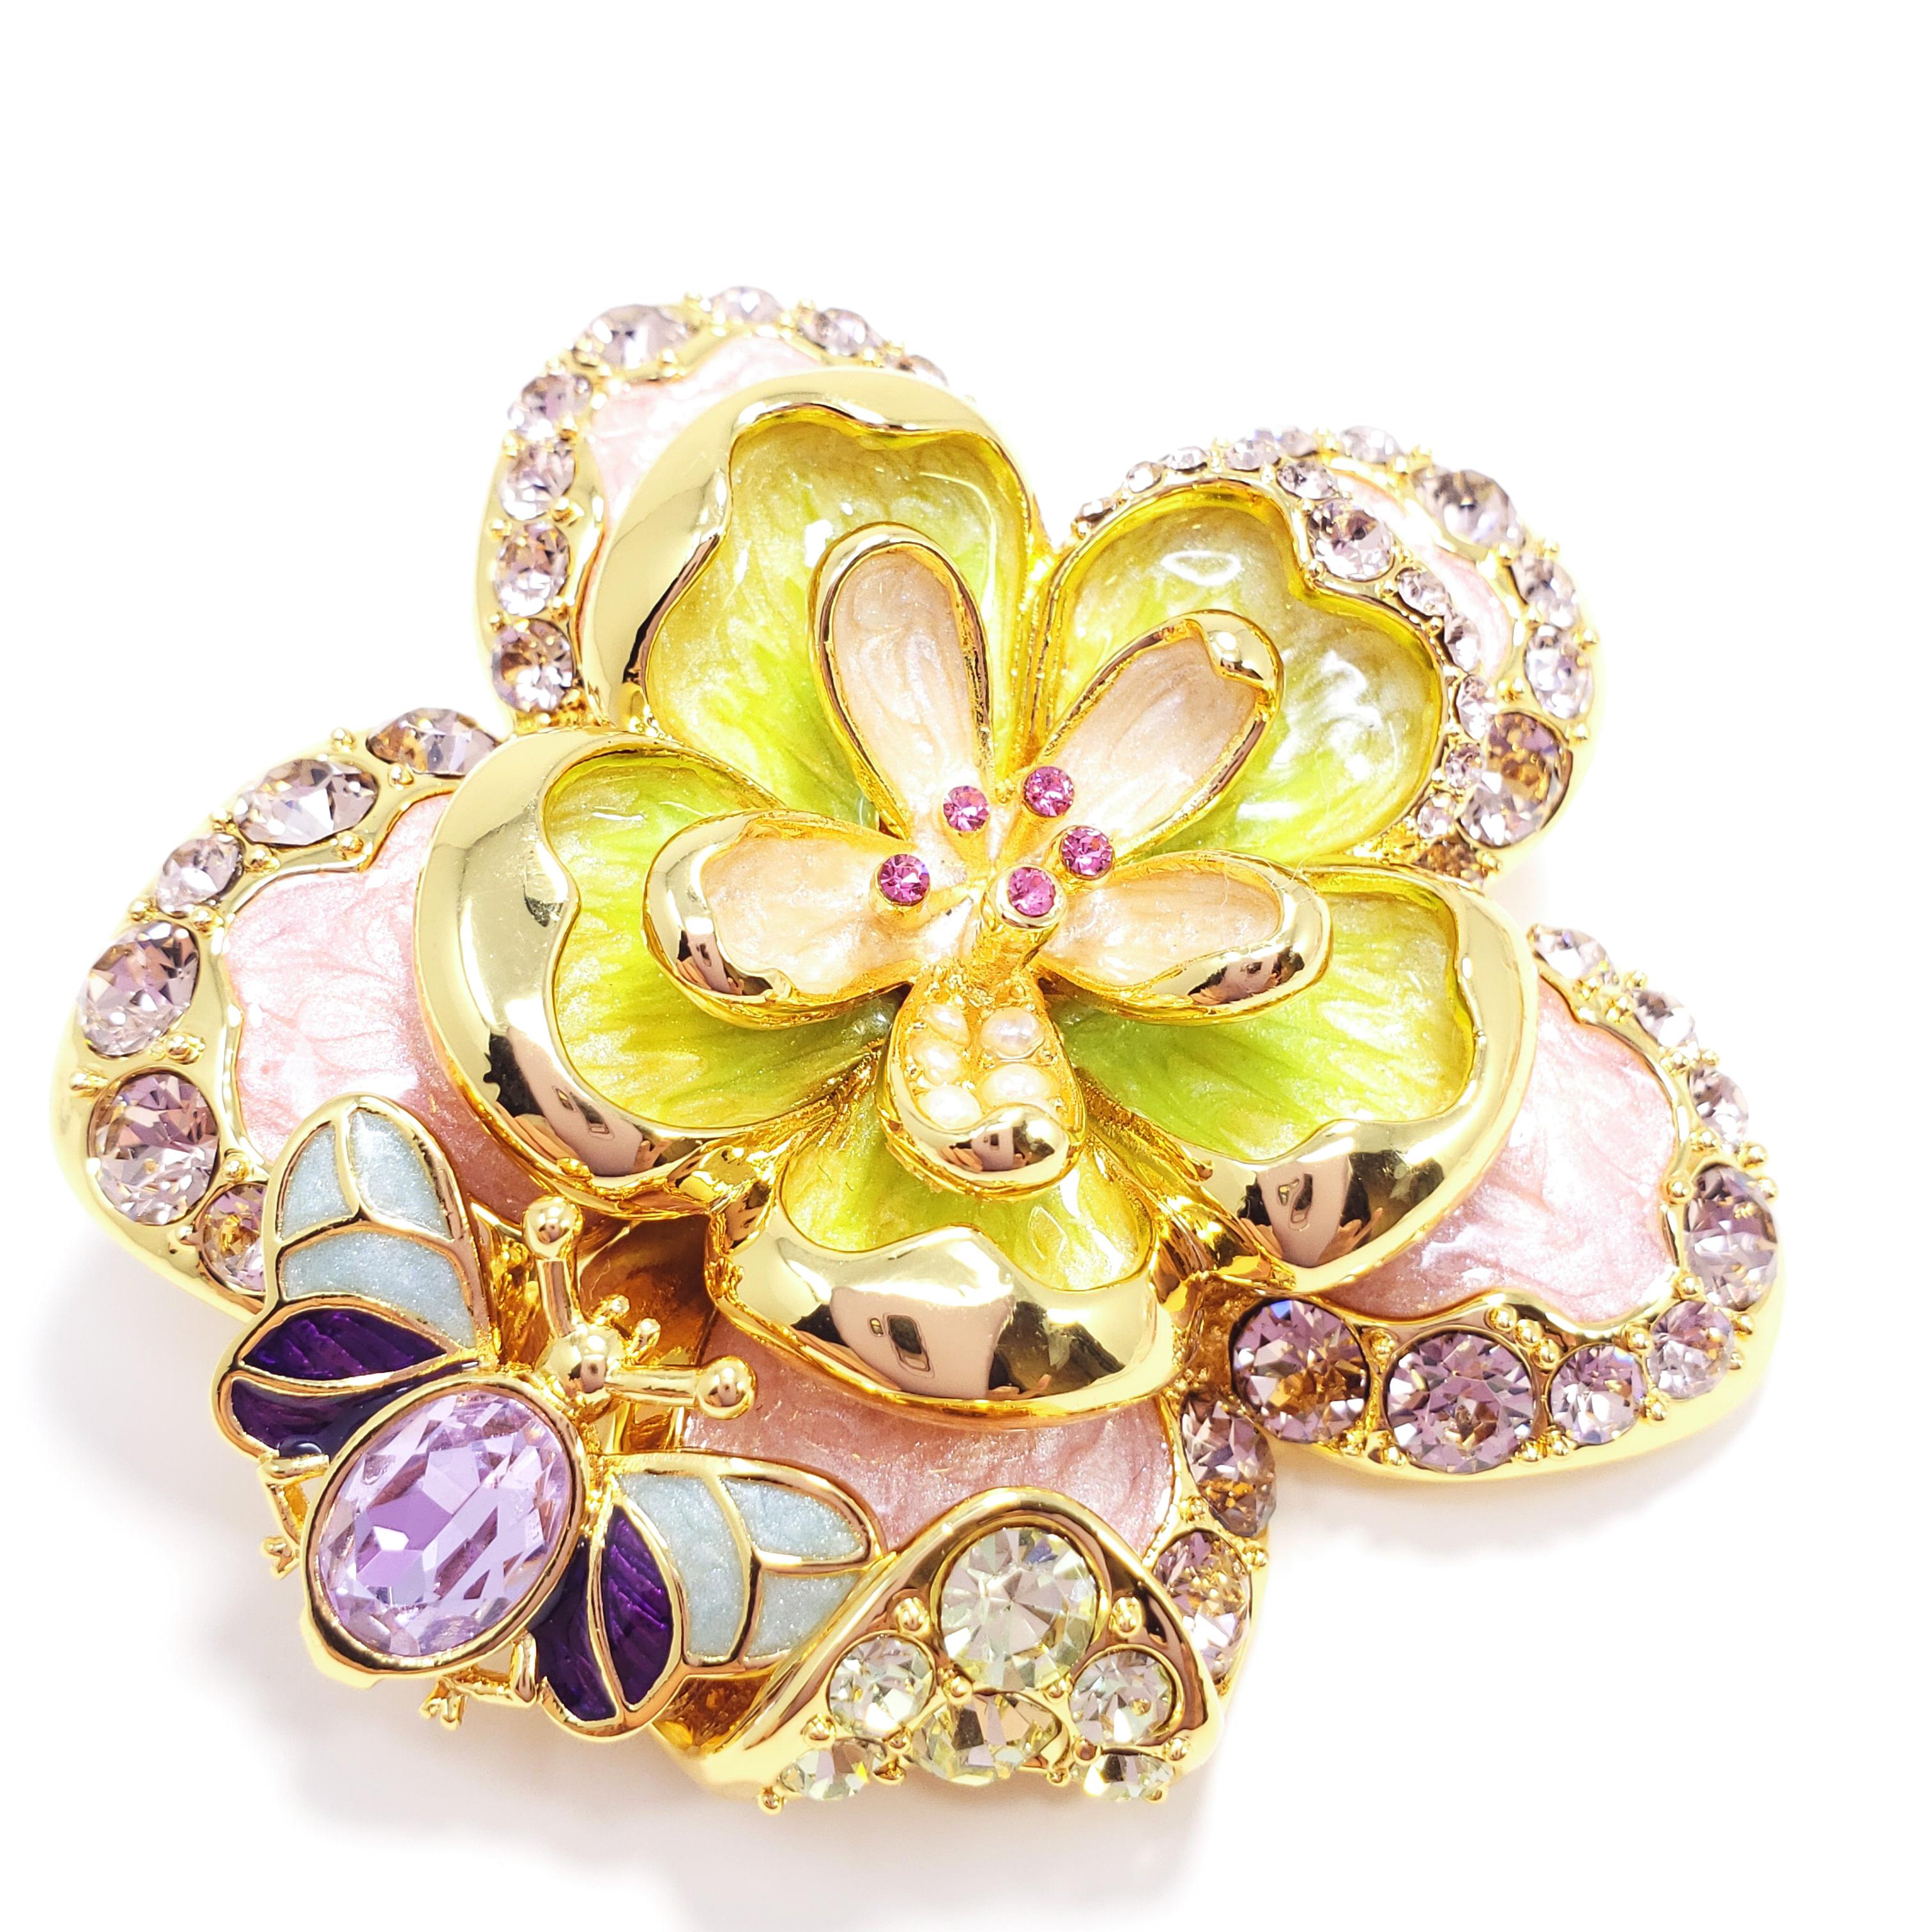 Flower power! An ornate floral motif featuring pink crystals & faux pearls. Painted with green and pink enamel, this colorful accessory can serve as either a pin/brooch or a necklace pendant.. Set on gold plated metal.

Hallmarks: Jay, Jay